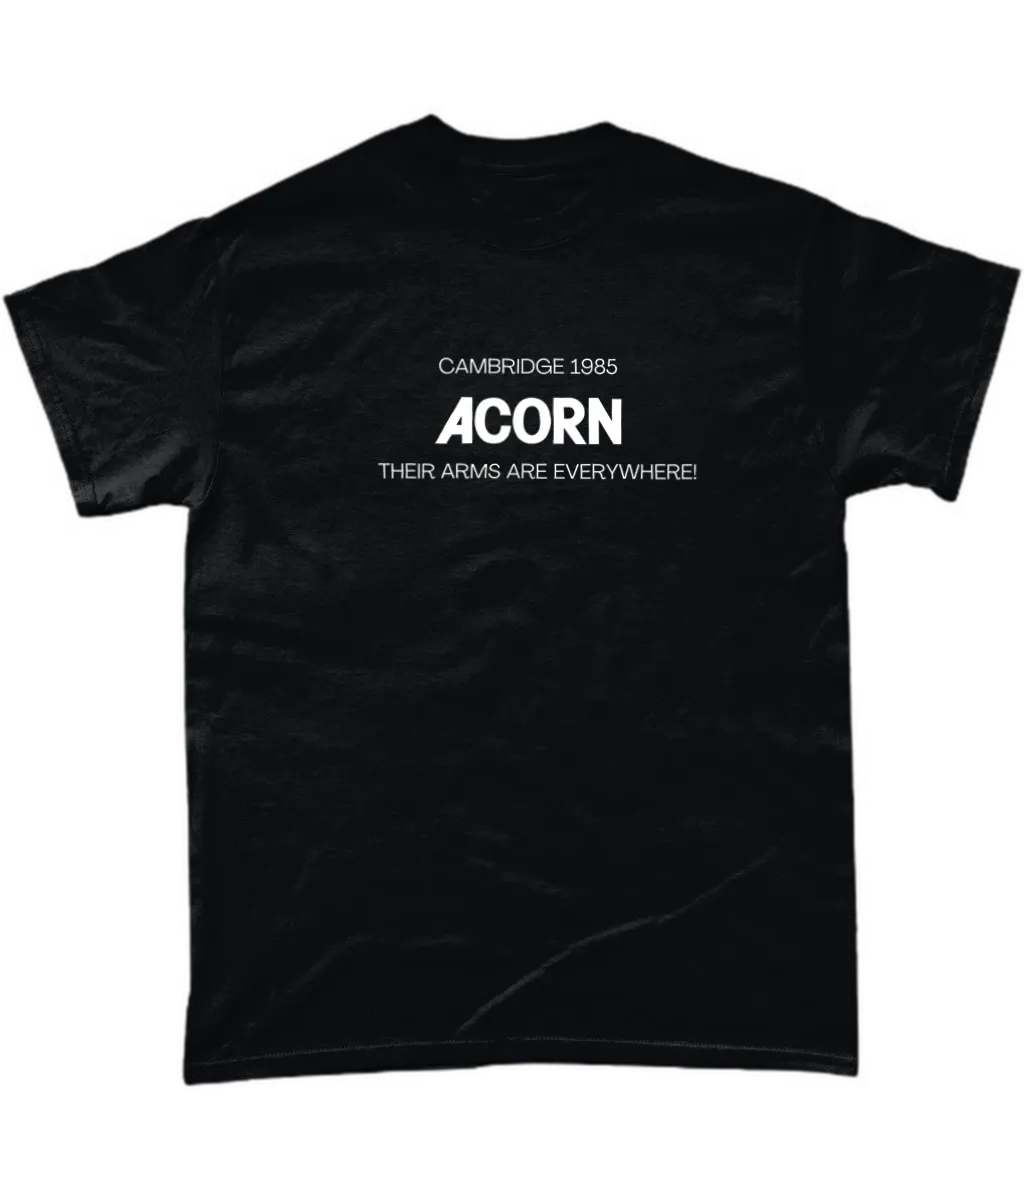 Black t shirt saying Cambridge 1985 ACORN  Their ARMS are Everywhere!